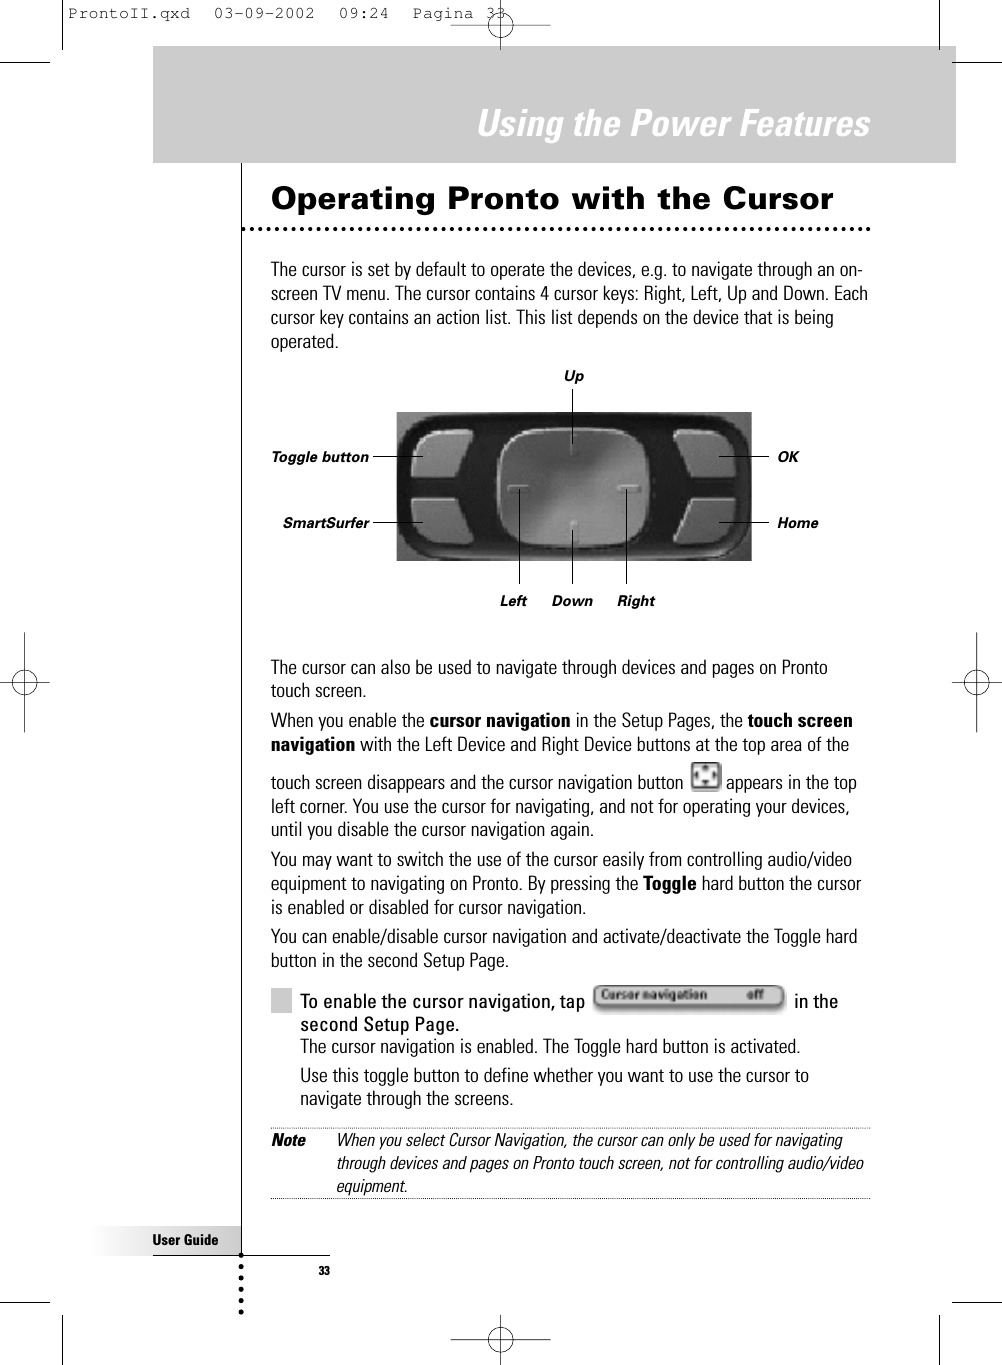 User Guide33Operating Pronto with the CursorThe cursor is set by default to operate the devices, e.g. to navigate through an on-screen TV menu. The cursor contains 4 cursor keys: Right, Left, Up and Down. Eachcursor key contains an action list. This list depends on the device that is beingoperated.The cursor can also be used to navigate through devices and pages on Prontotouch screen. When you enable the cursor navigation in the Setup Pages, the touch screennavigation with the Left Device and Right Device buttons at the top area of thetouch screen disappears and the cursor navigation button  appears in the topleft corner. You use the cursor for navigating, and not for operating your devices,until you disable the cursor navigation again.You may want to switch the use of the cursor easily from controlling audio/videoequipment to navigating on Pronto. By pressing the Toggle hard button the cursoris enabled or disabled for cursor navigation.You can enable/disable cursor navigation and activate/deactivate the Toggle hardbutton in the second Setup Page.To enable the cursor navigation, tap  in thesecond Setup Page.The cursor navigation is enabled. The Toggle hard button is activated.Use this toggle button to define whether you want to use the cursor tonavigate through the screens.Note When you select Cursor Navigation, the cursor can only be used for navigatingthrough devices and pages on Pronto touch screen, not for controlling audio/videoequipment.Using the Power FeaturesOKHomeToggle buttonSmartSurferUpDownLeft RightProntoII.qxd  03-09-2002  09:24  Pagina 33